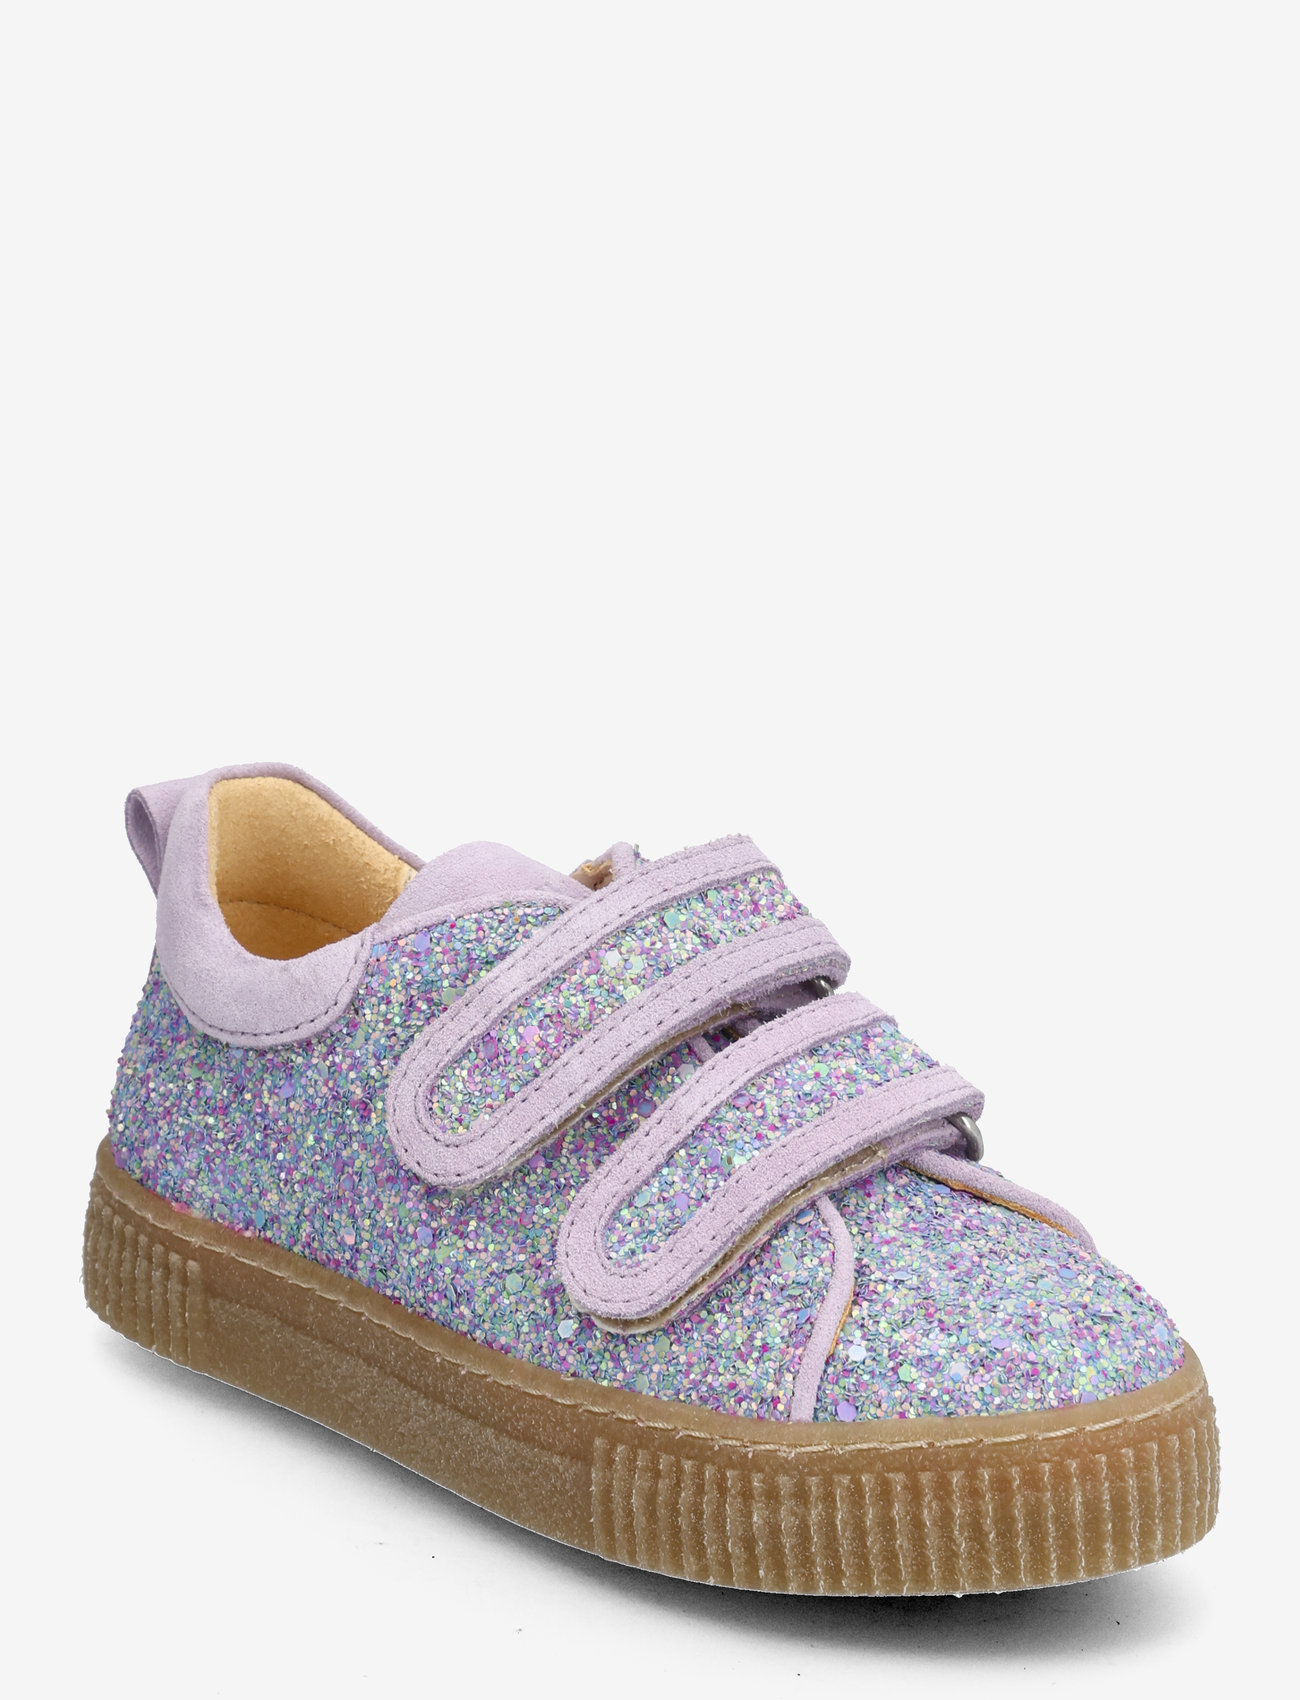 ANGULUS - Shoes - flat - with velcro - sommerschnäppchen - 2753/2245 confetti glitter/lil - 0